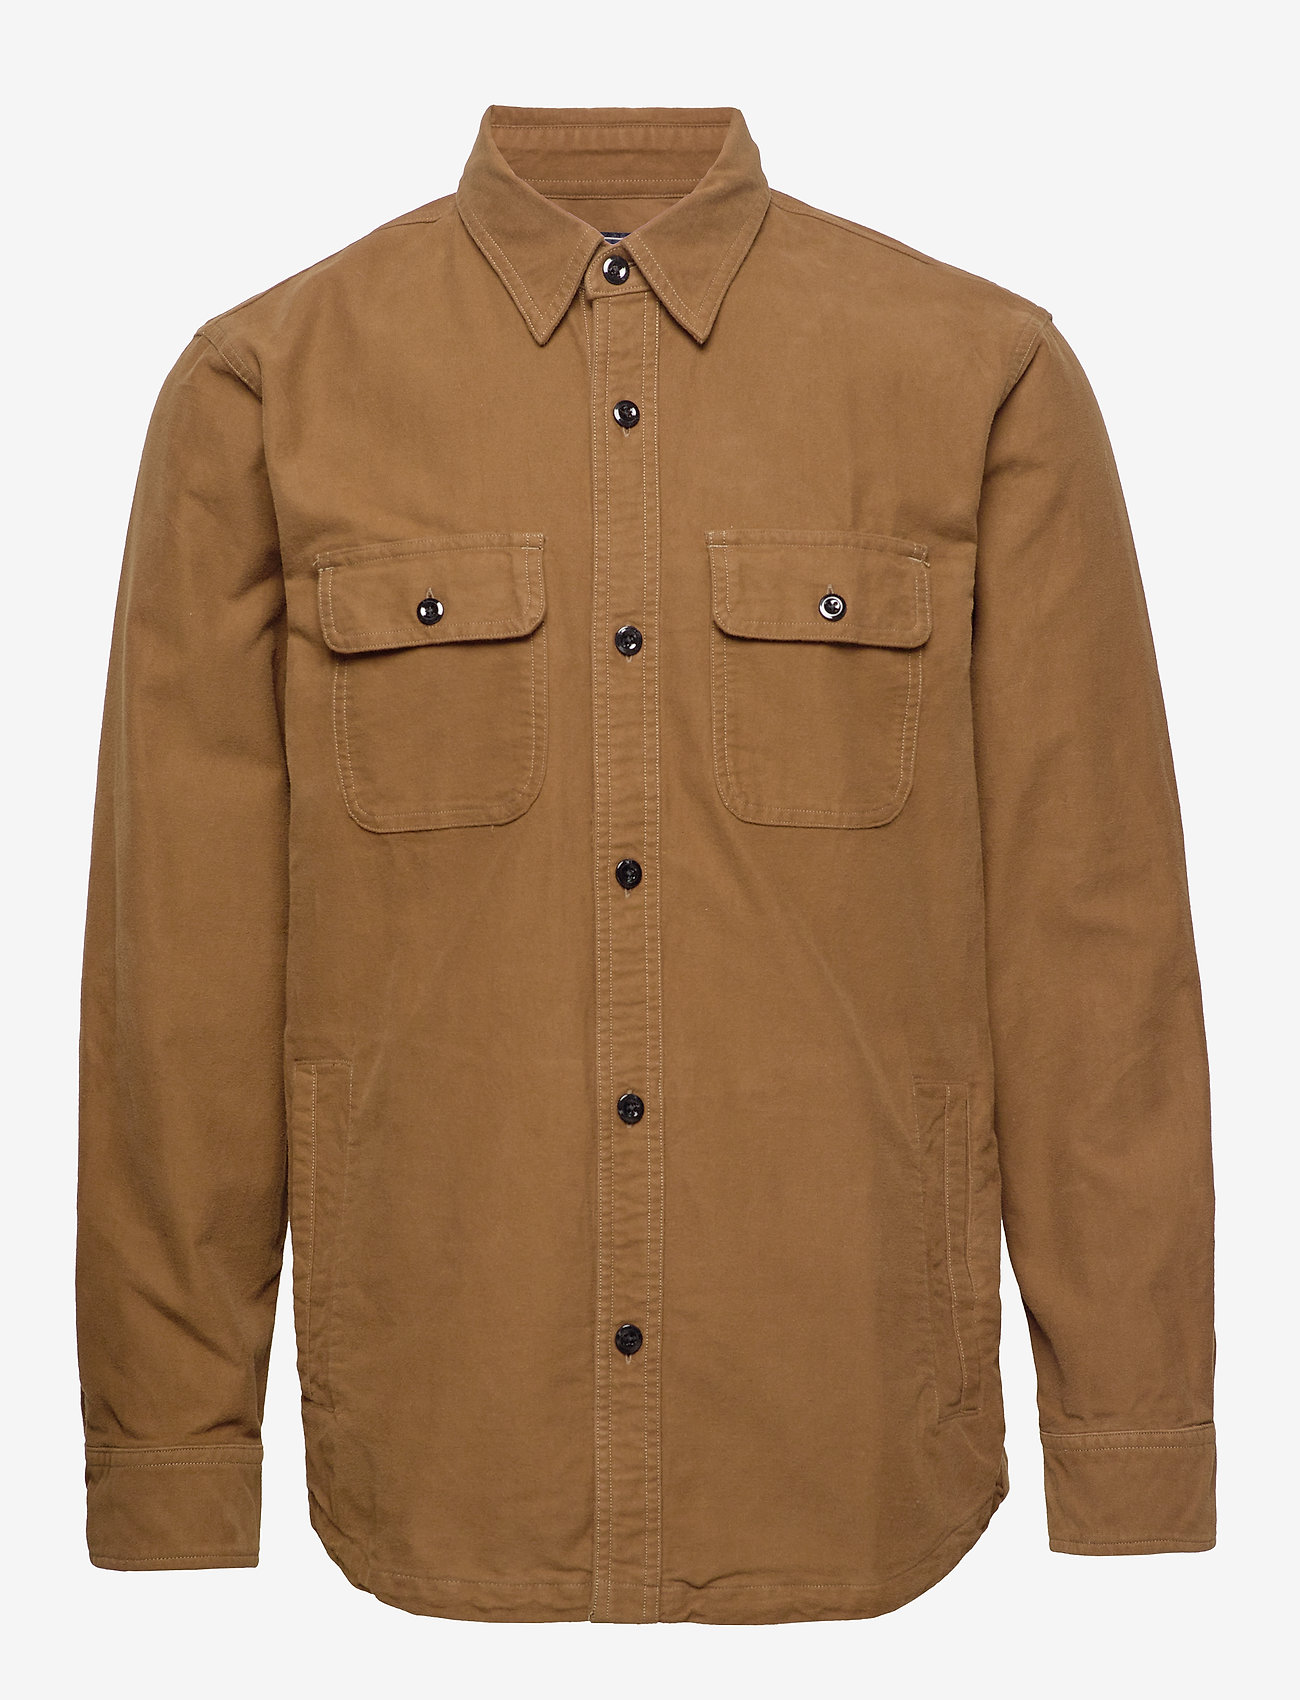 abercrombie and fitch brown jacket